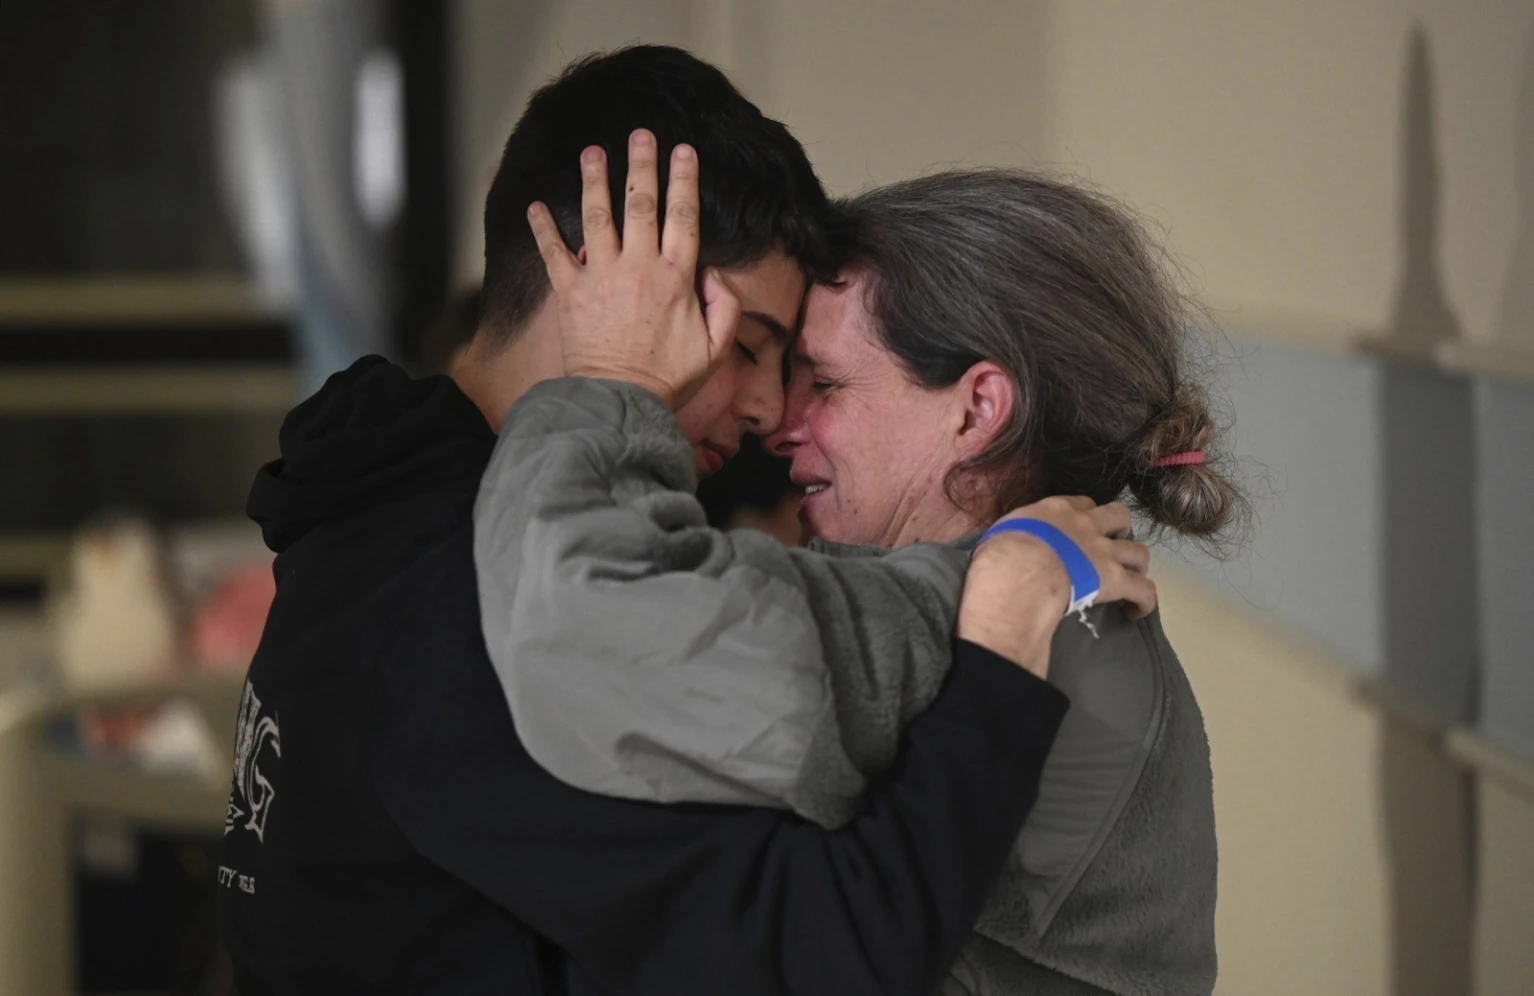 Irregular meals, benches as beds: As freed hostages return to Israel, details of captivity emerge